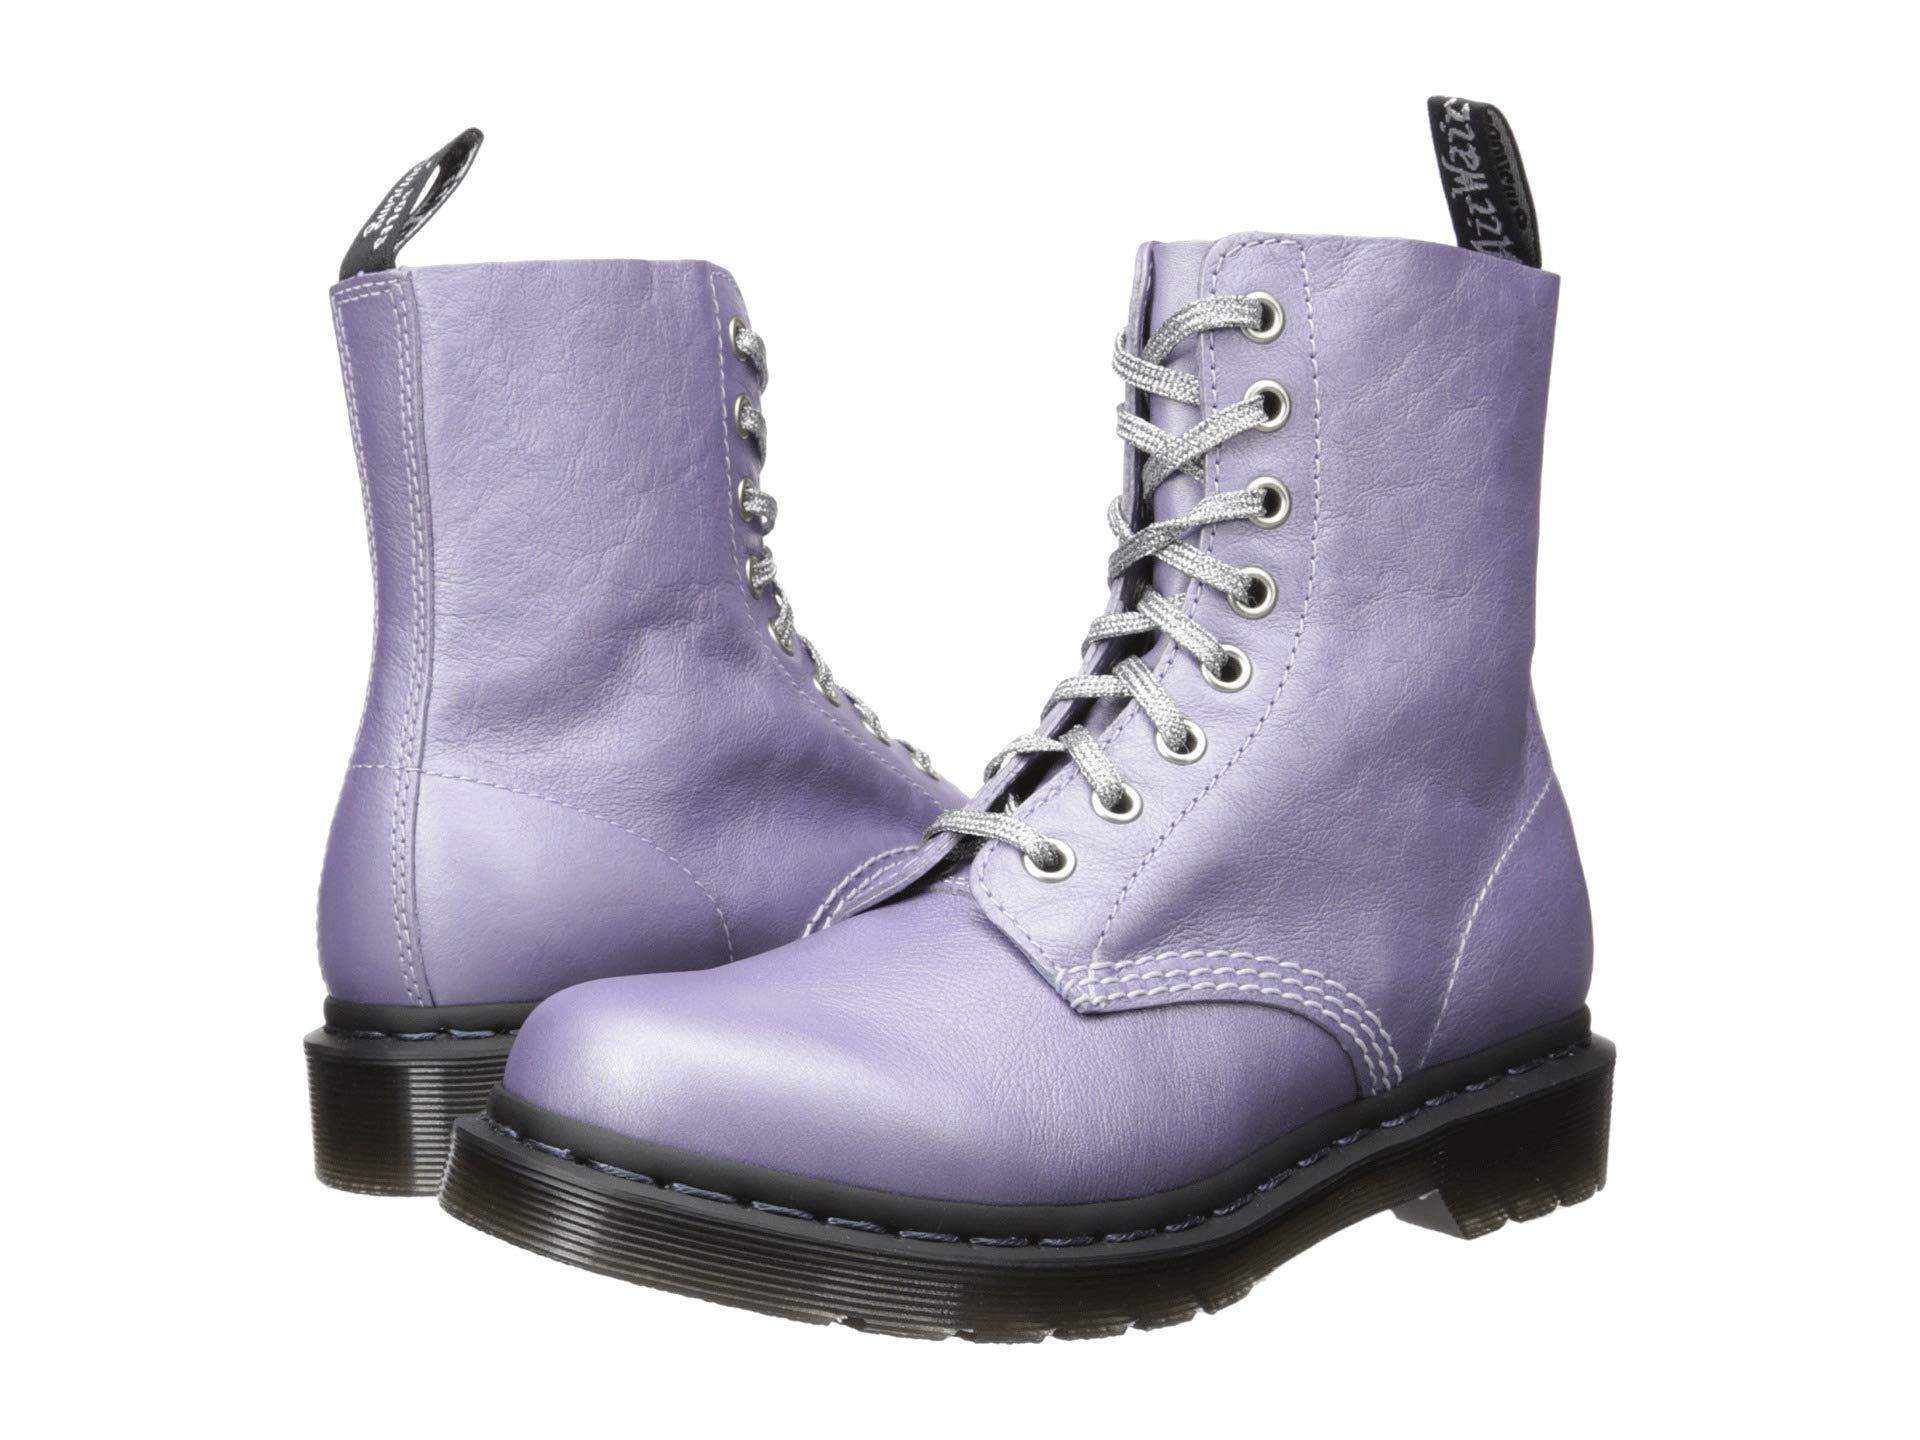 Dr. Martens 1460 Metallic Leather Boot in Lavender (Purple) - Lyst